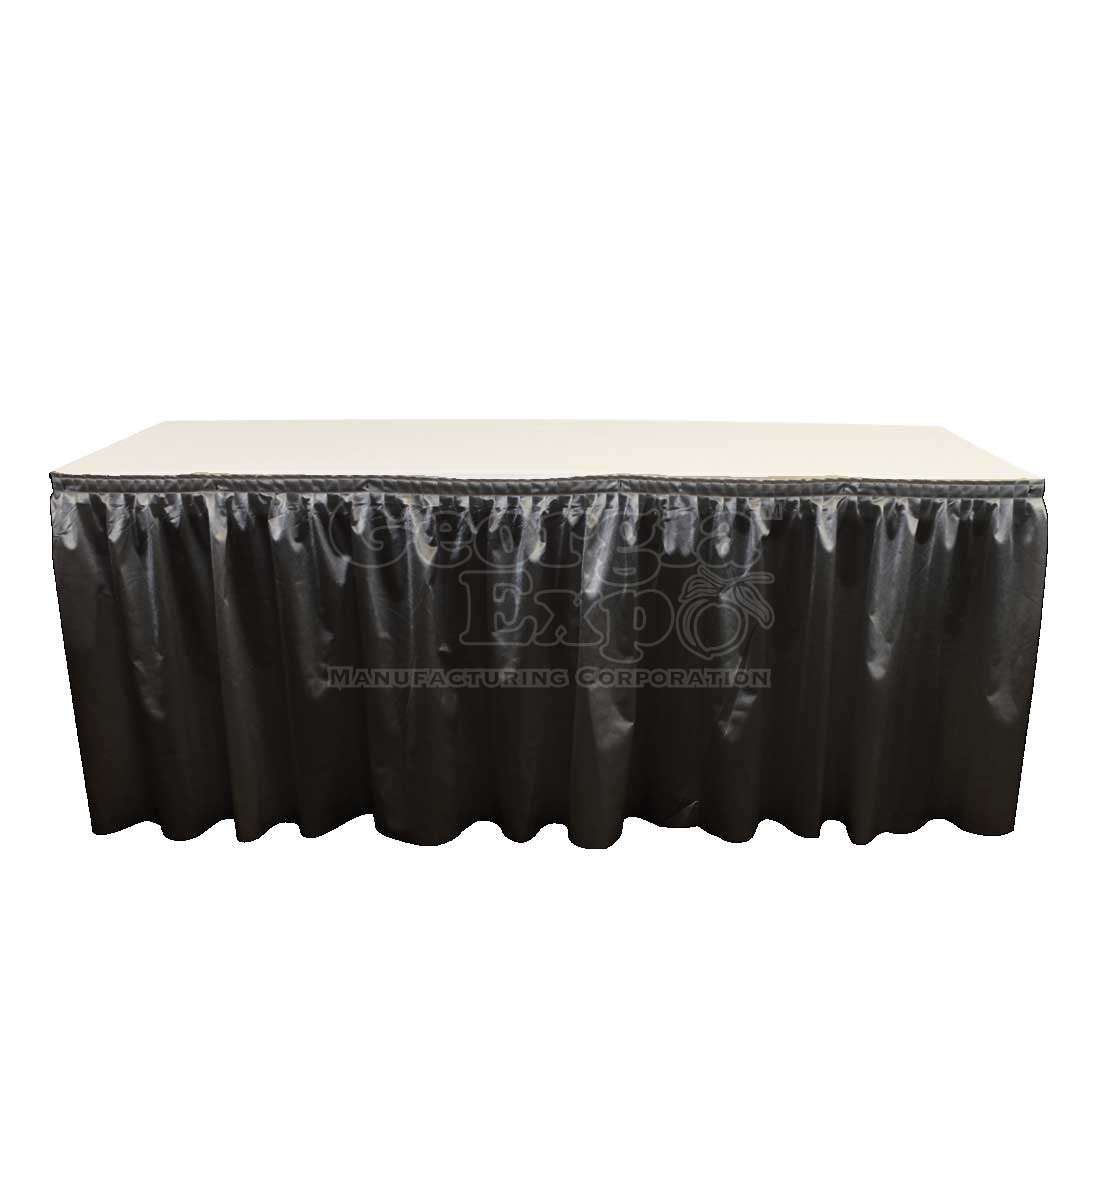 Buy Table Skirt Black 1 Online at Low Prices in India  Amazonin